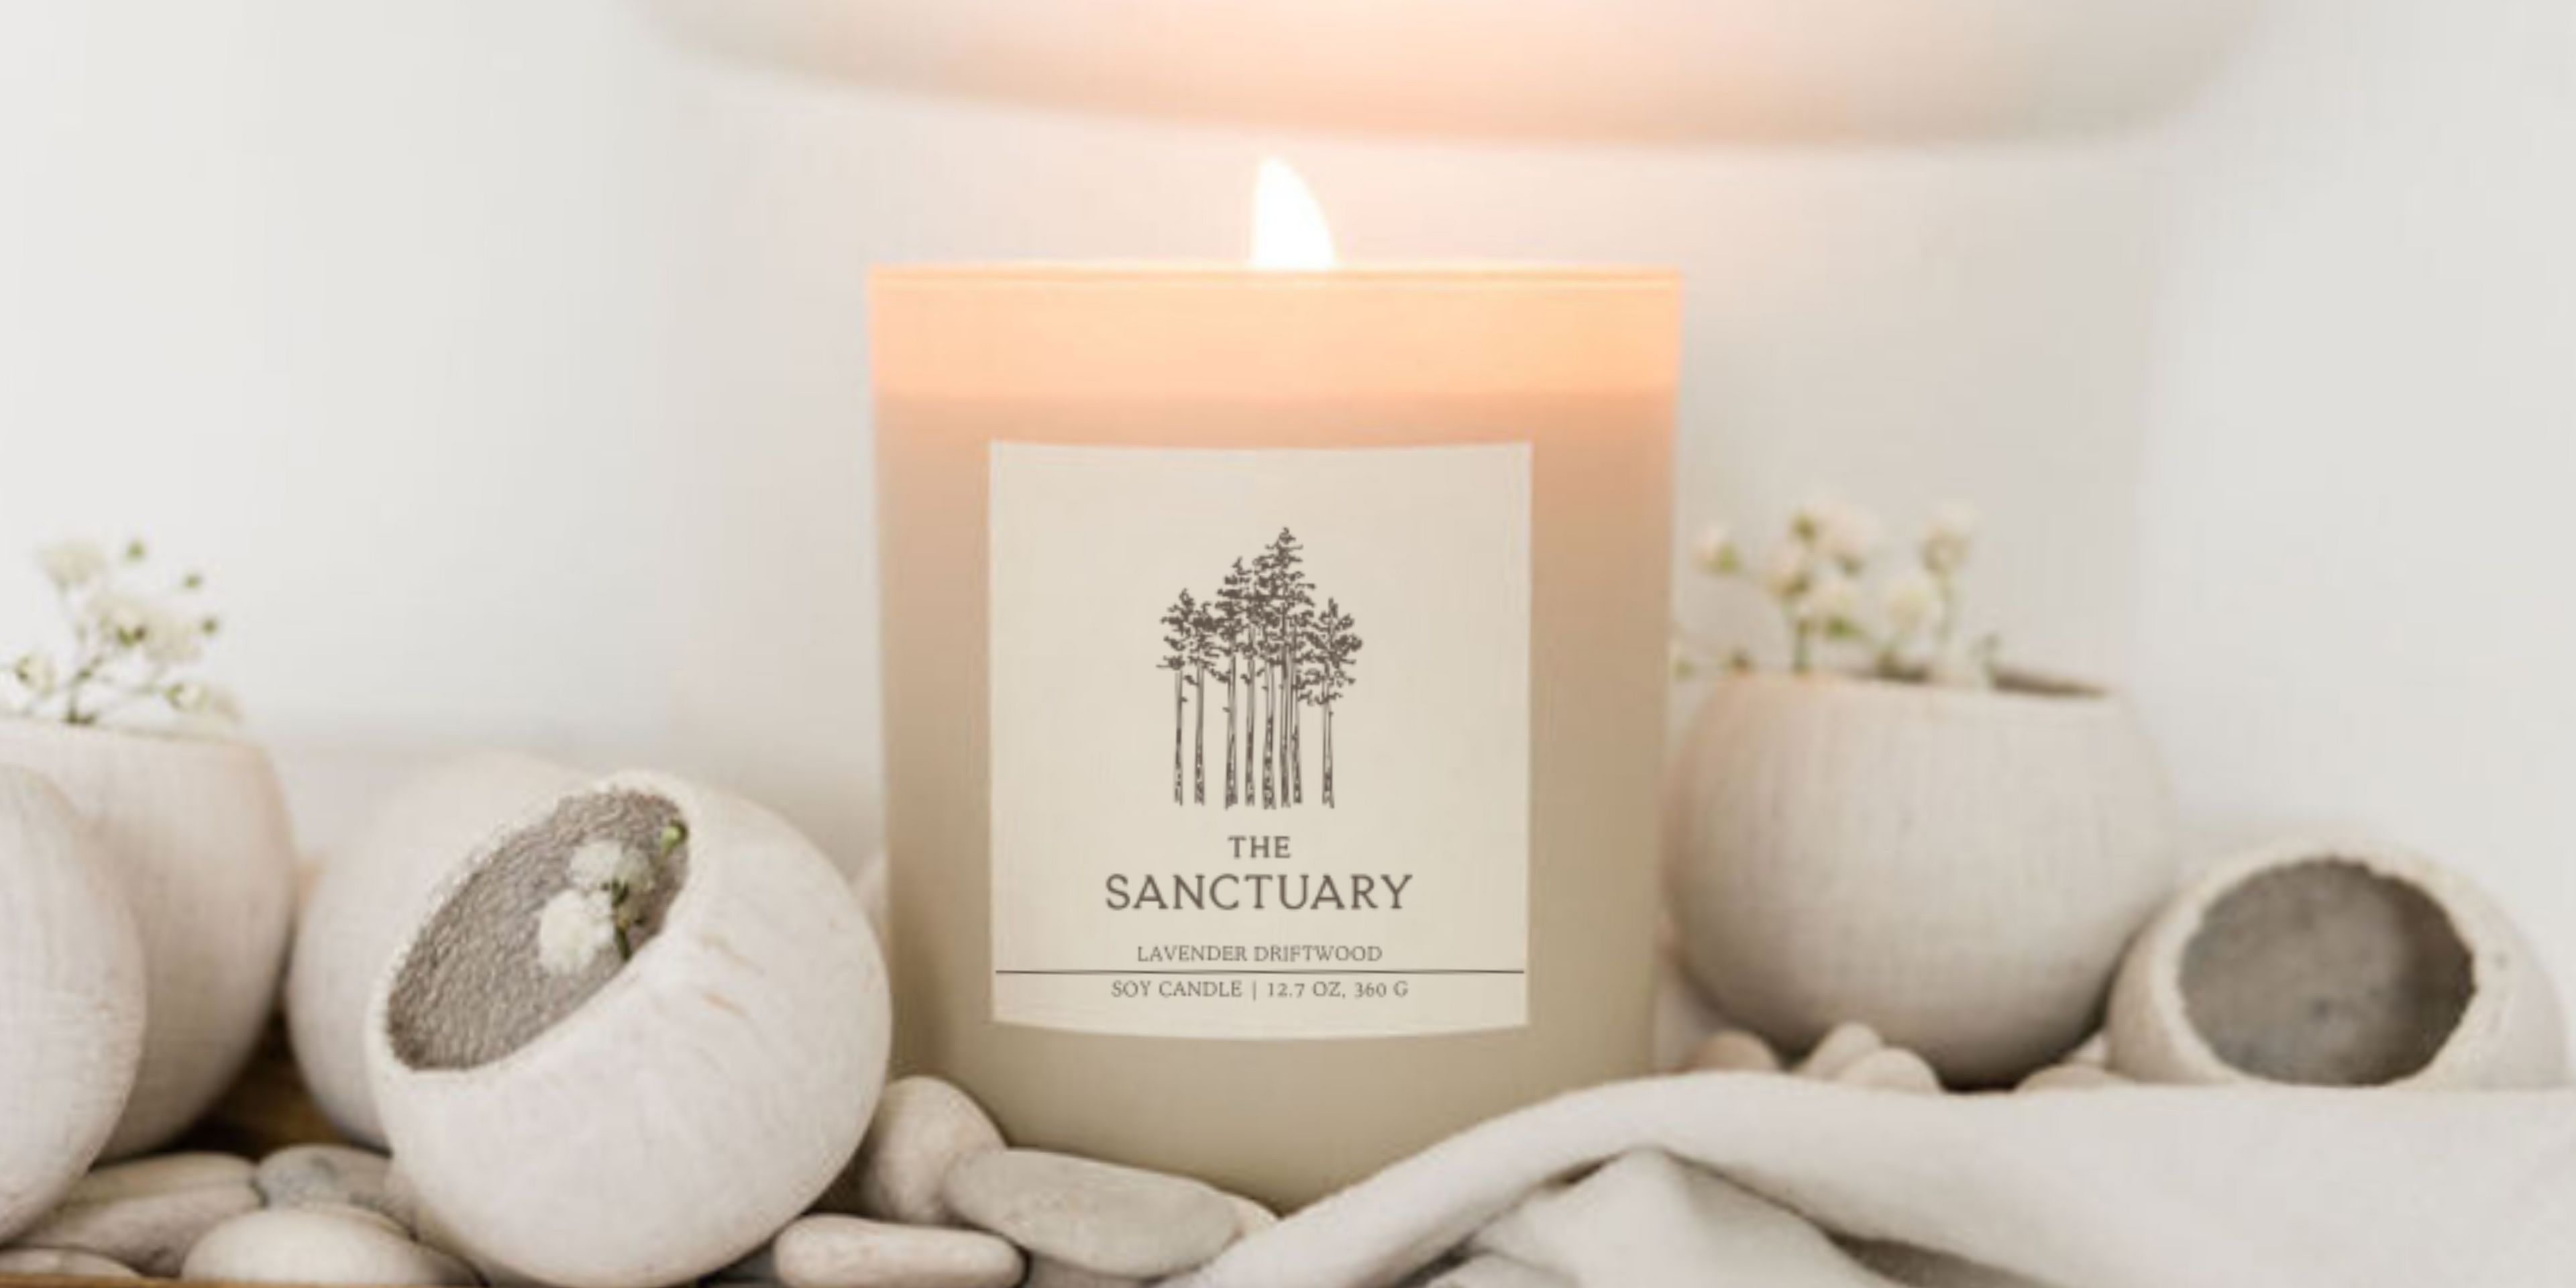 Luxury private label candles for spas